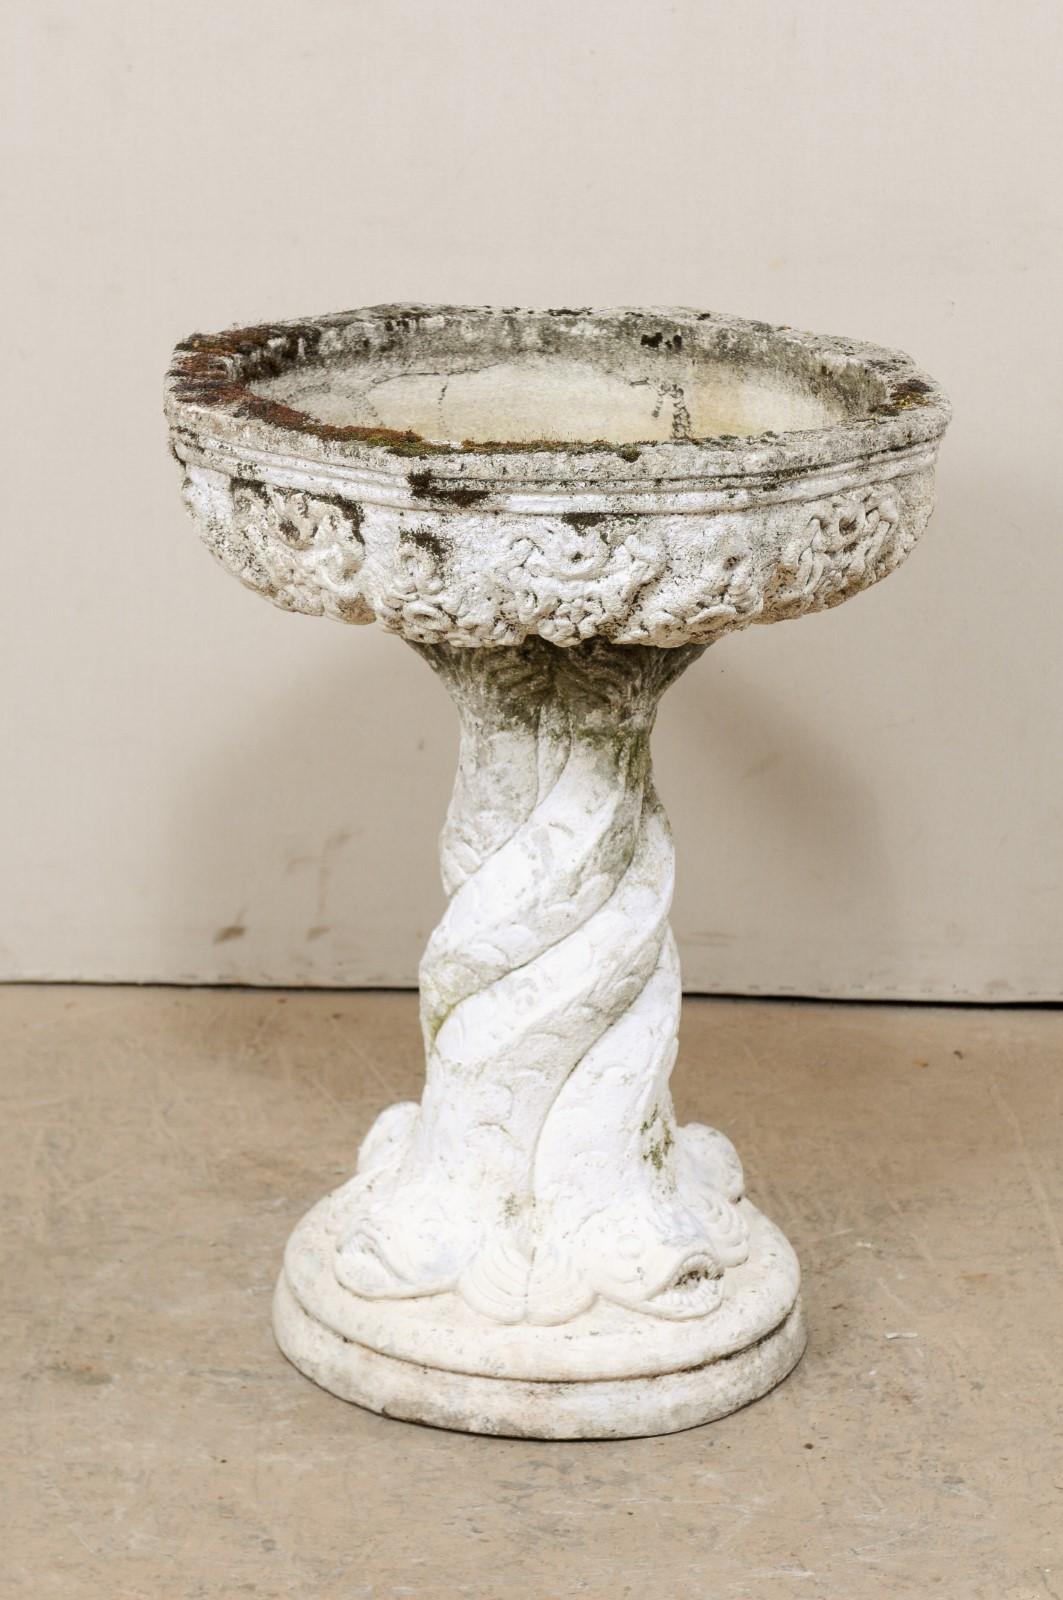 A French garden pedestal planter or fountain basin. This vintage cast-stone planter from France features a rounded vessel, just over 2 feet in diameter, which is raised nicely upon a central column adorn in mythological sea creatures wrapping about